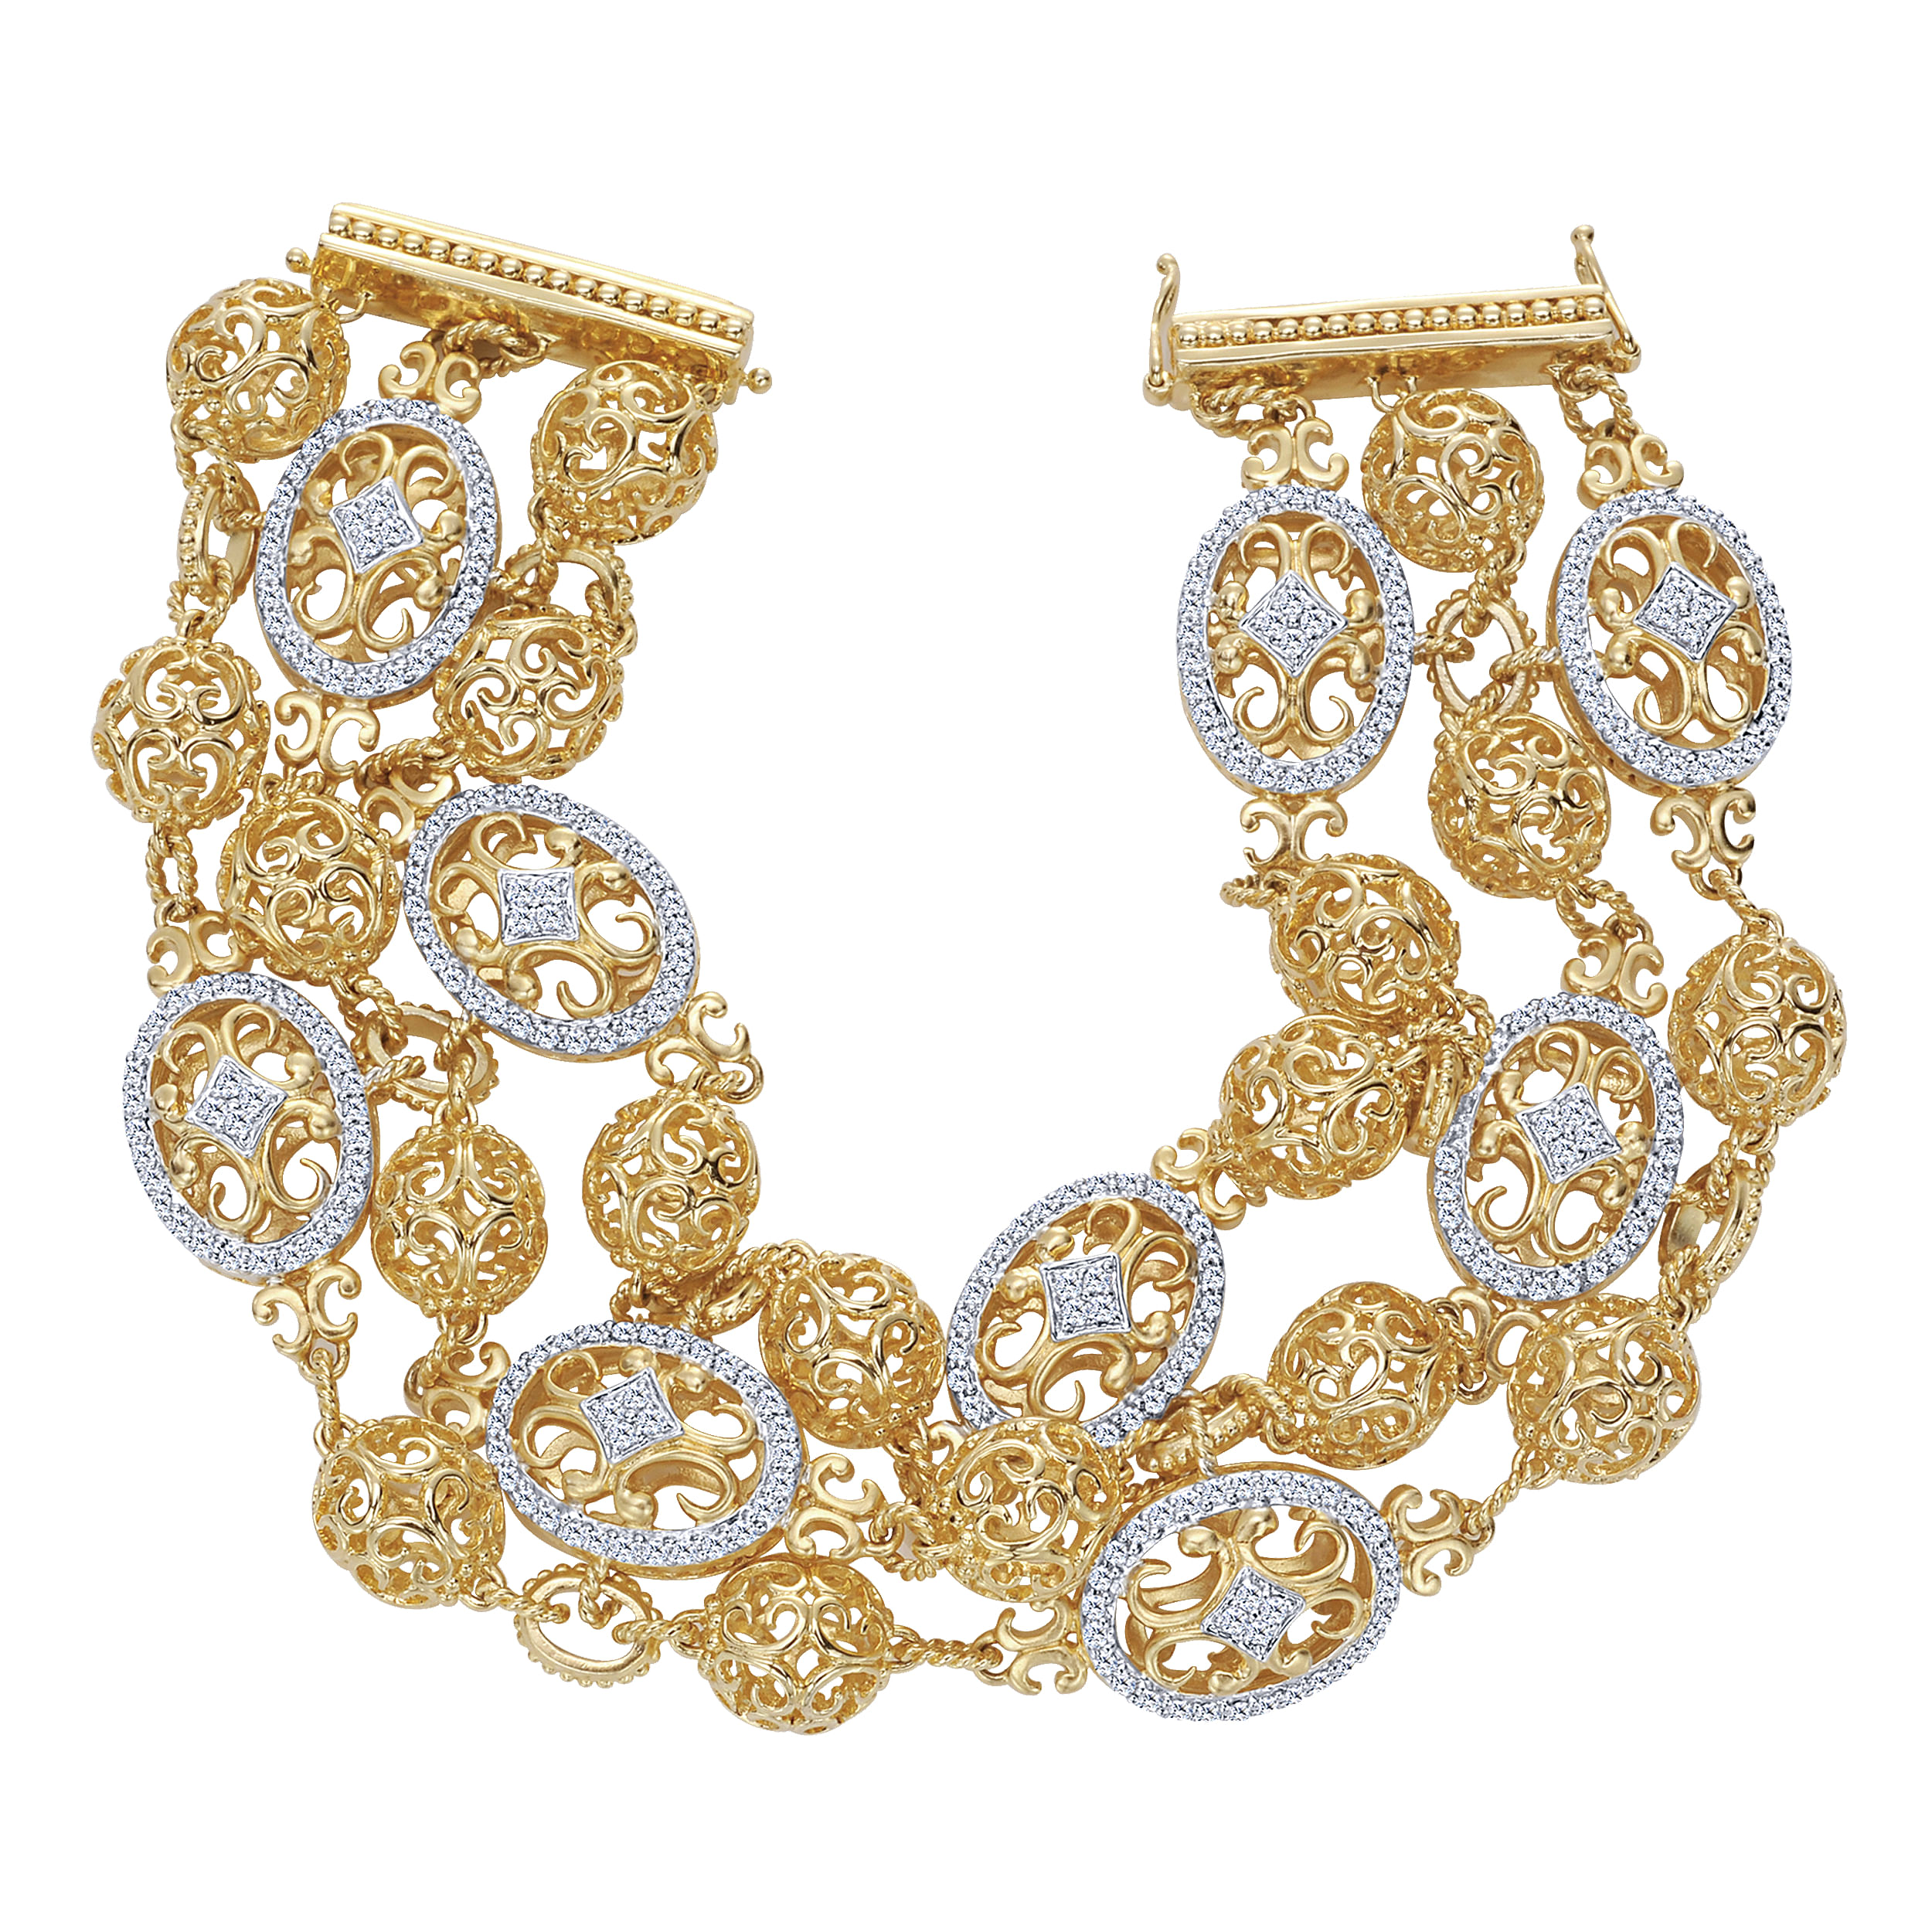 14K Yellow and White Gold Bracelet with Gold Spheres and Diamonds 